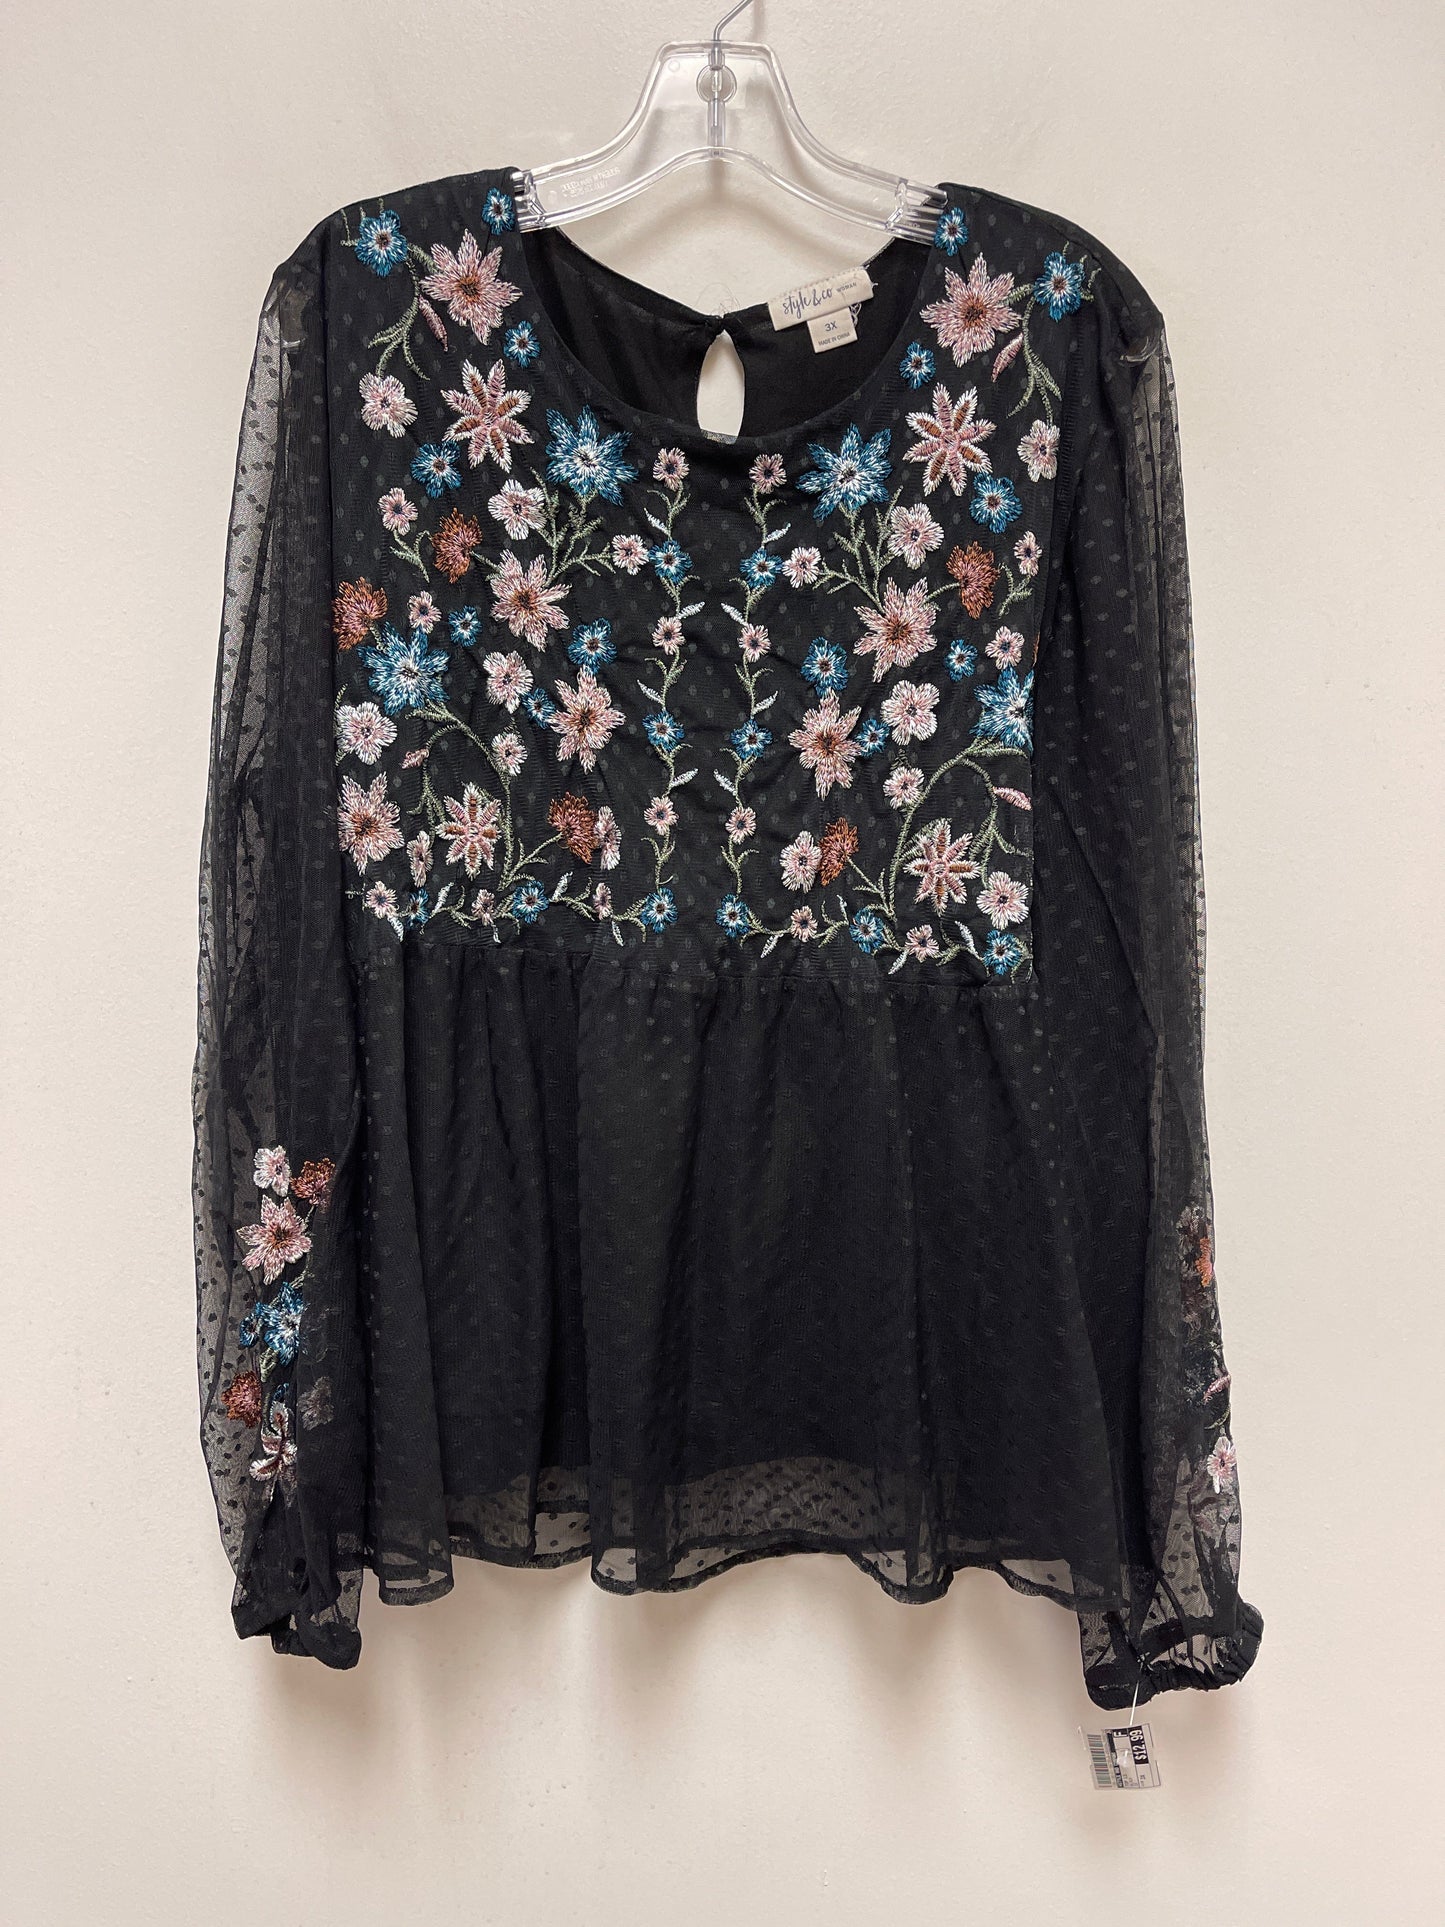 Black Top Long Sleeve Style And Company, Size 3x